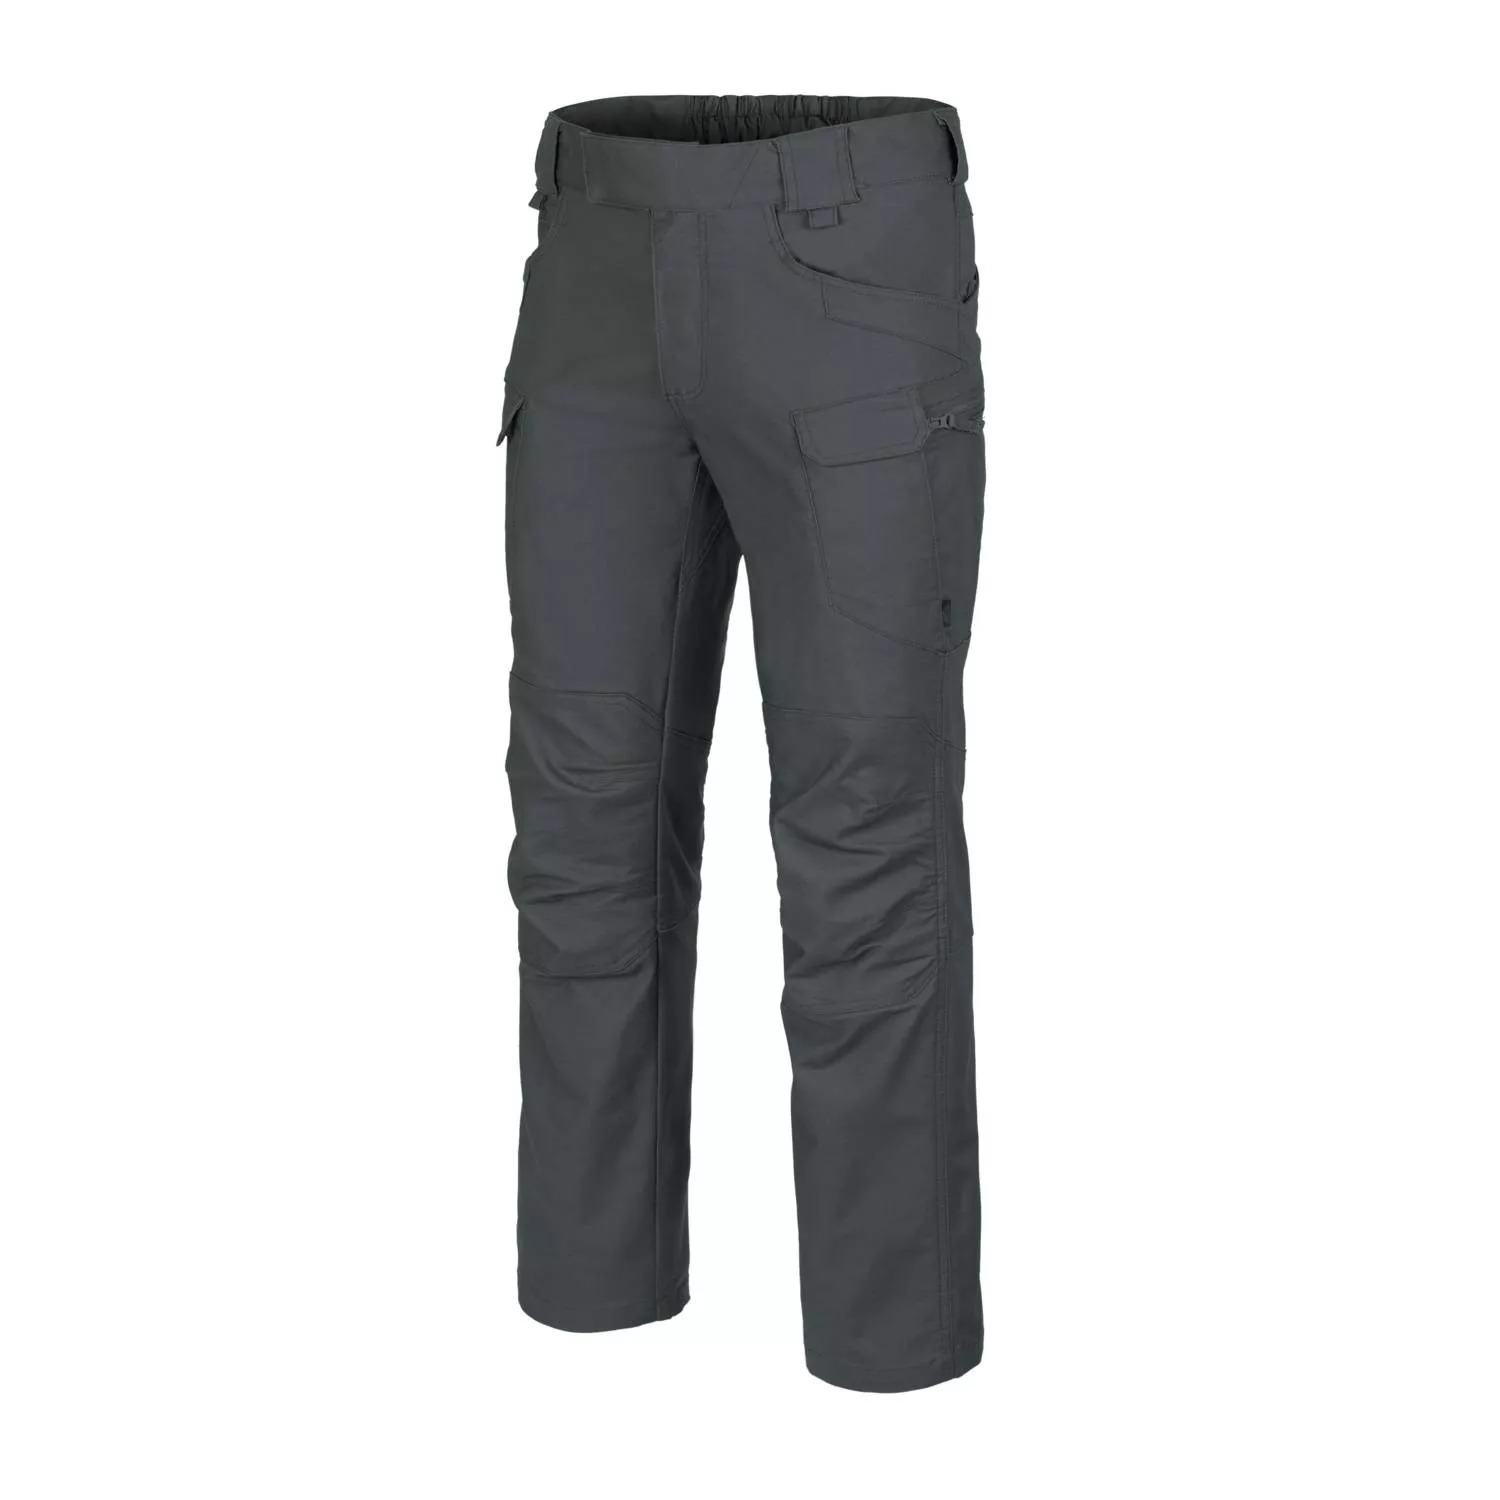 Outdoor Cargo Pants-For Male or Female